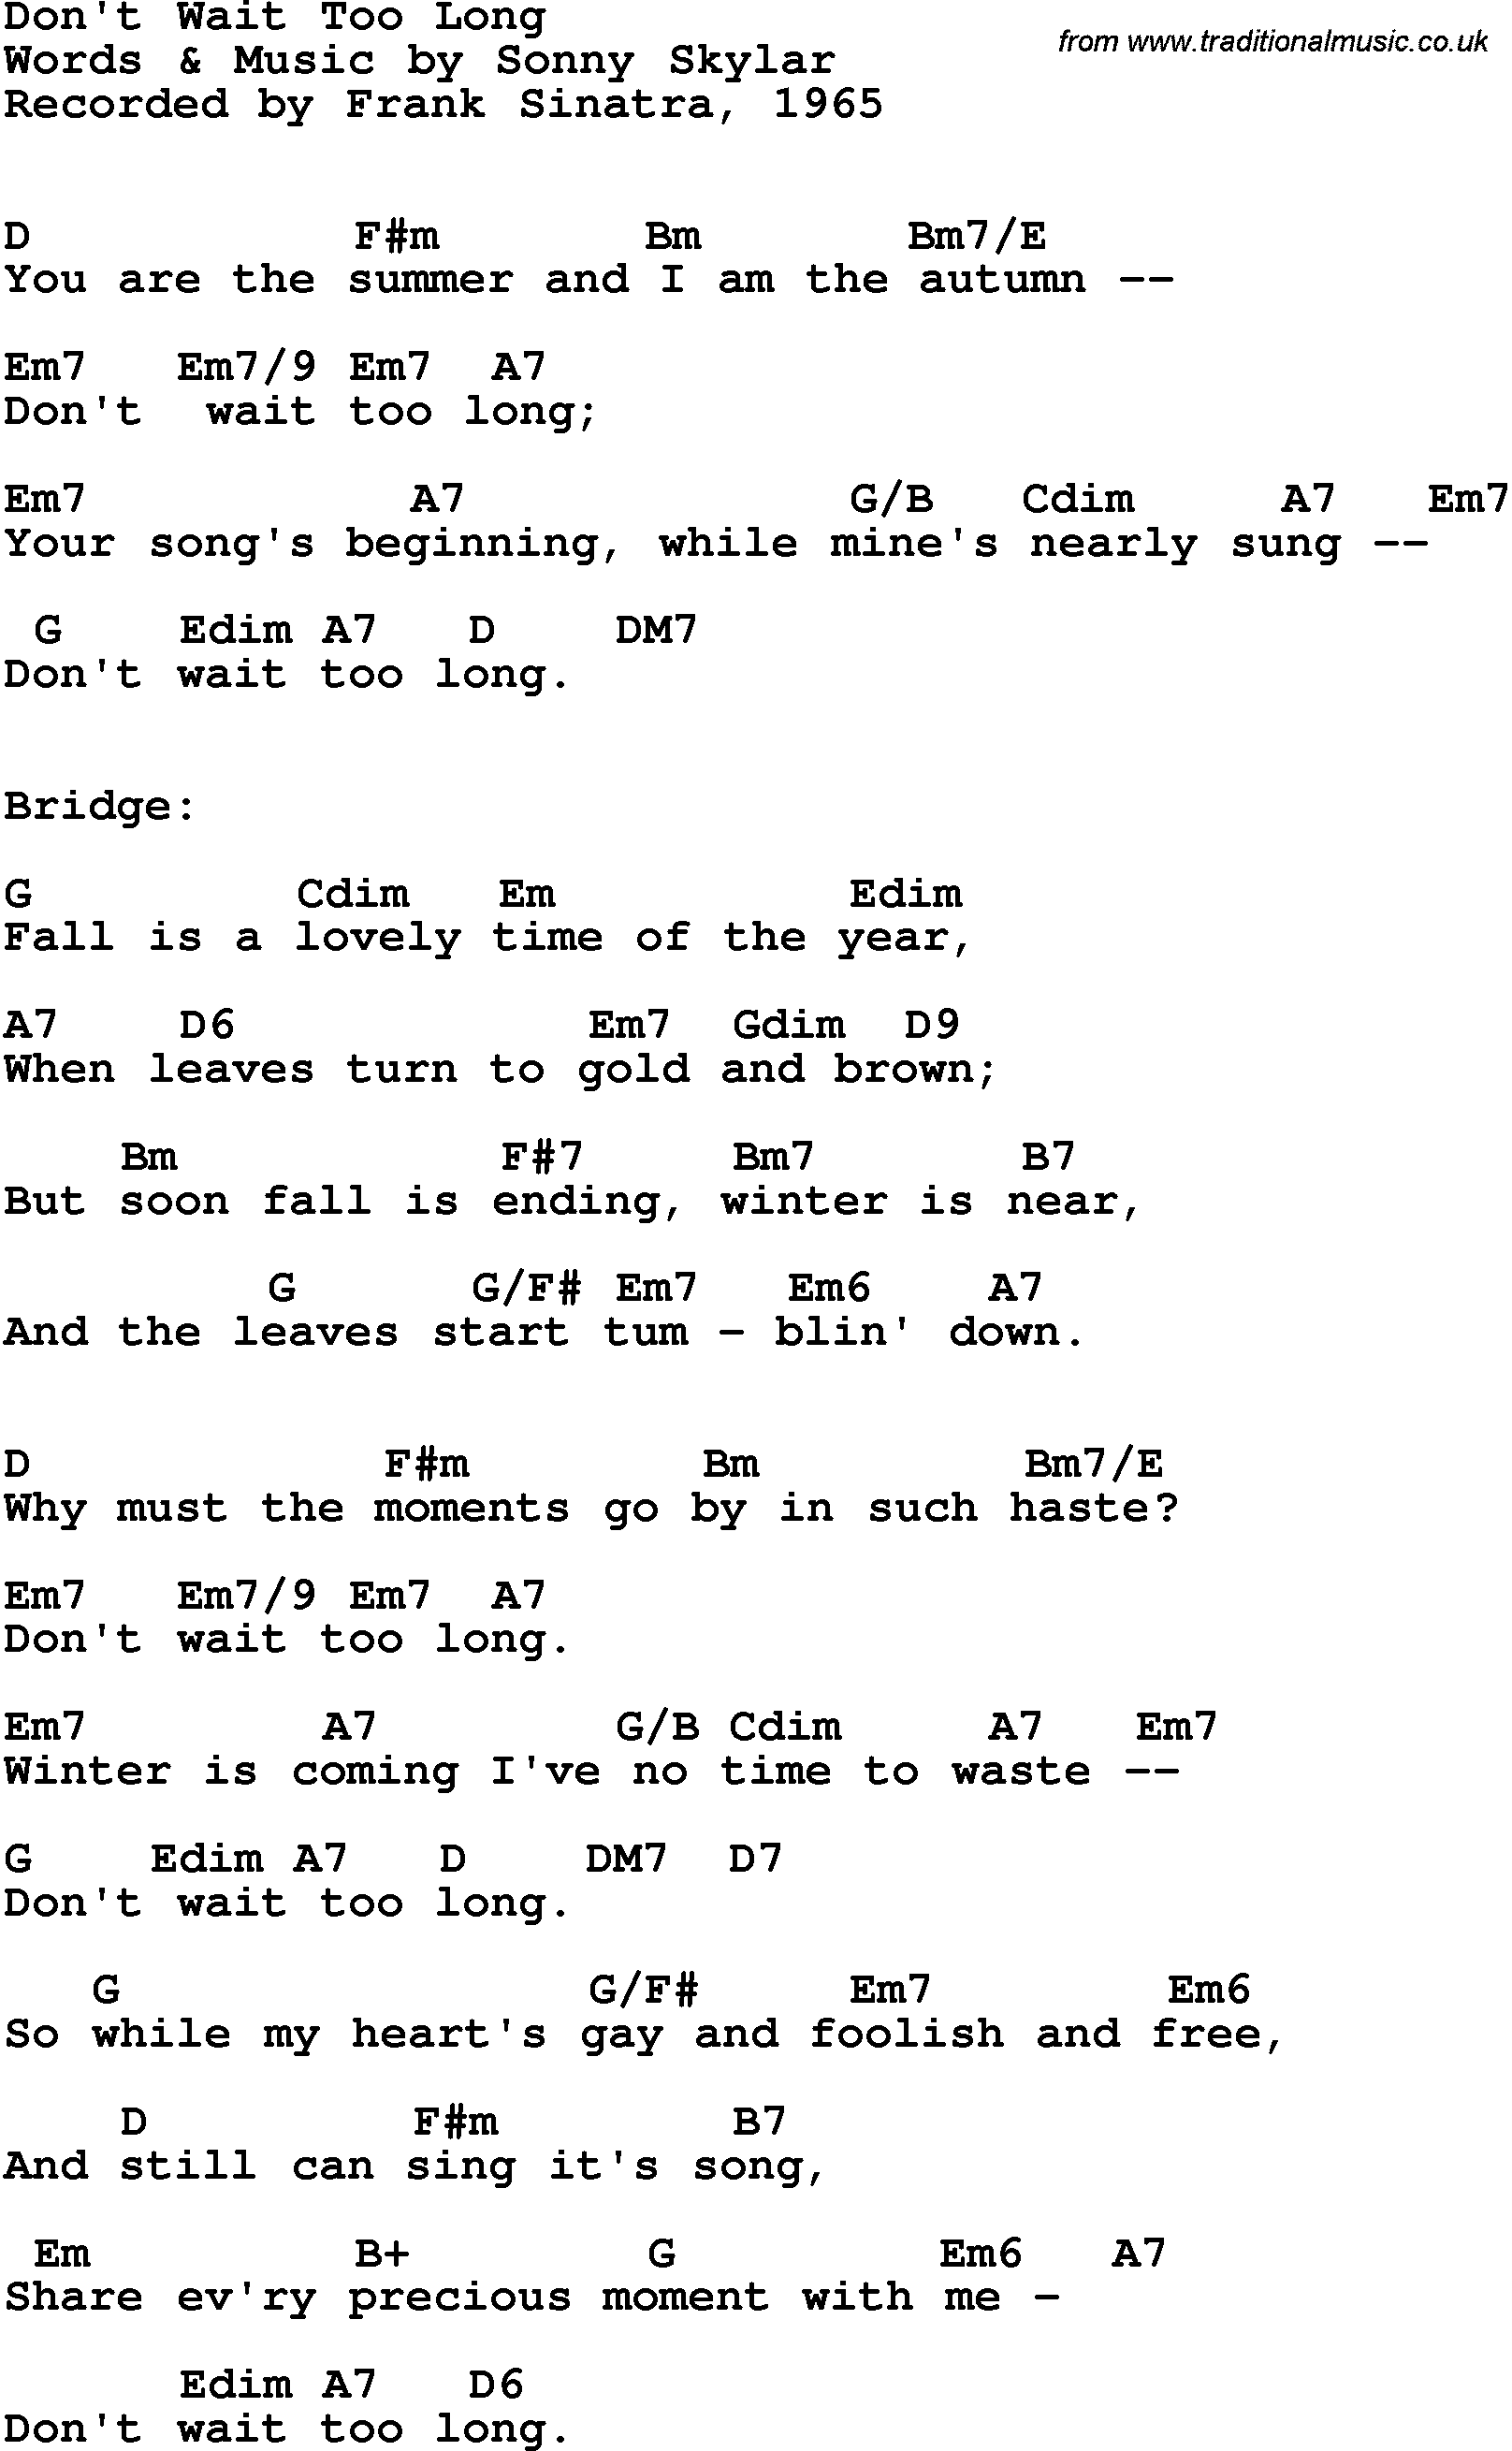 Song Lyrics with guitar chords for Don't Wait Too Long - Frank Sinatra, 1965